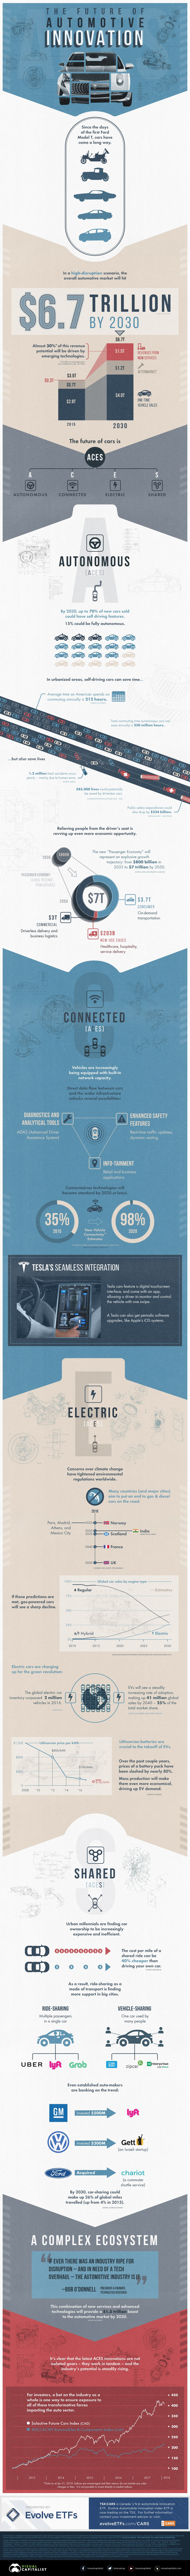 The Future of Automotive Innovation #Infographic